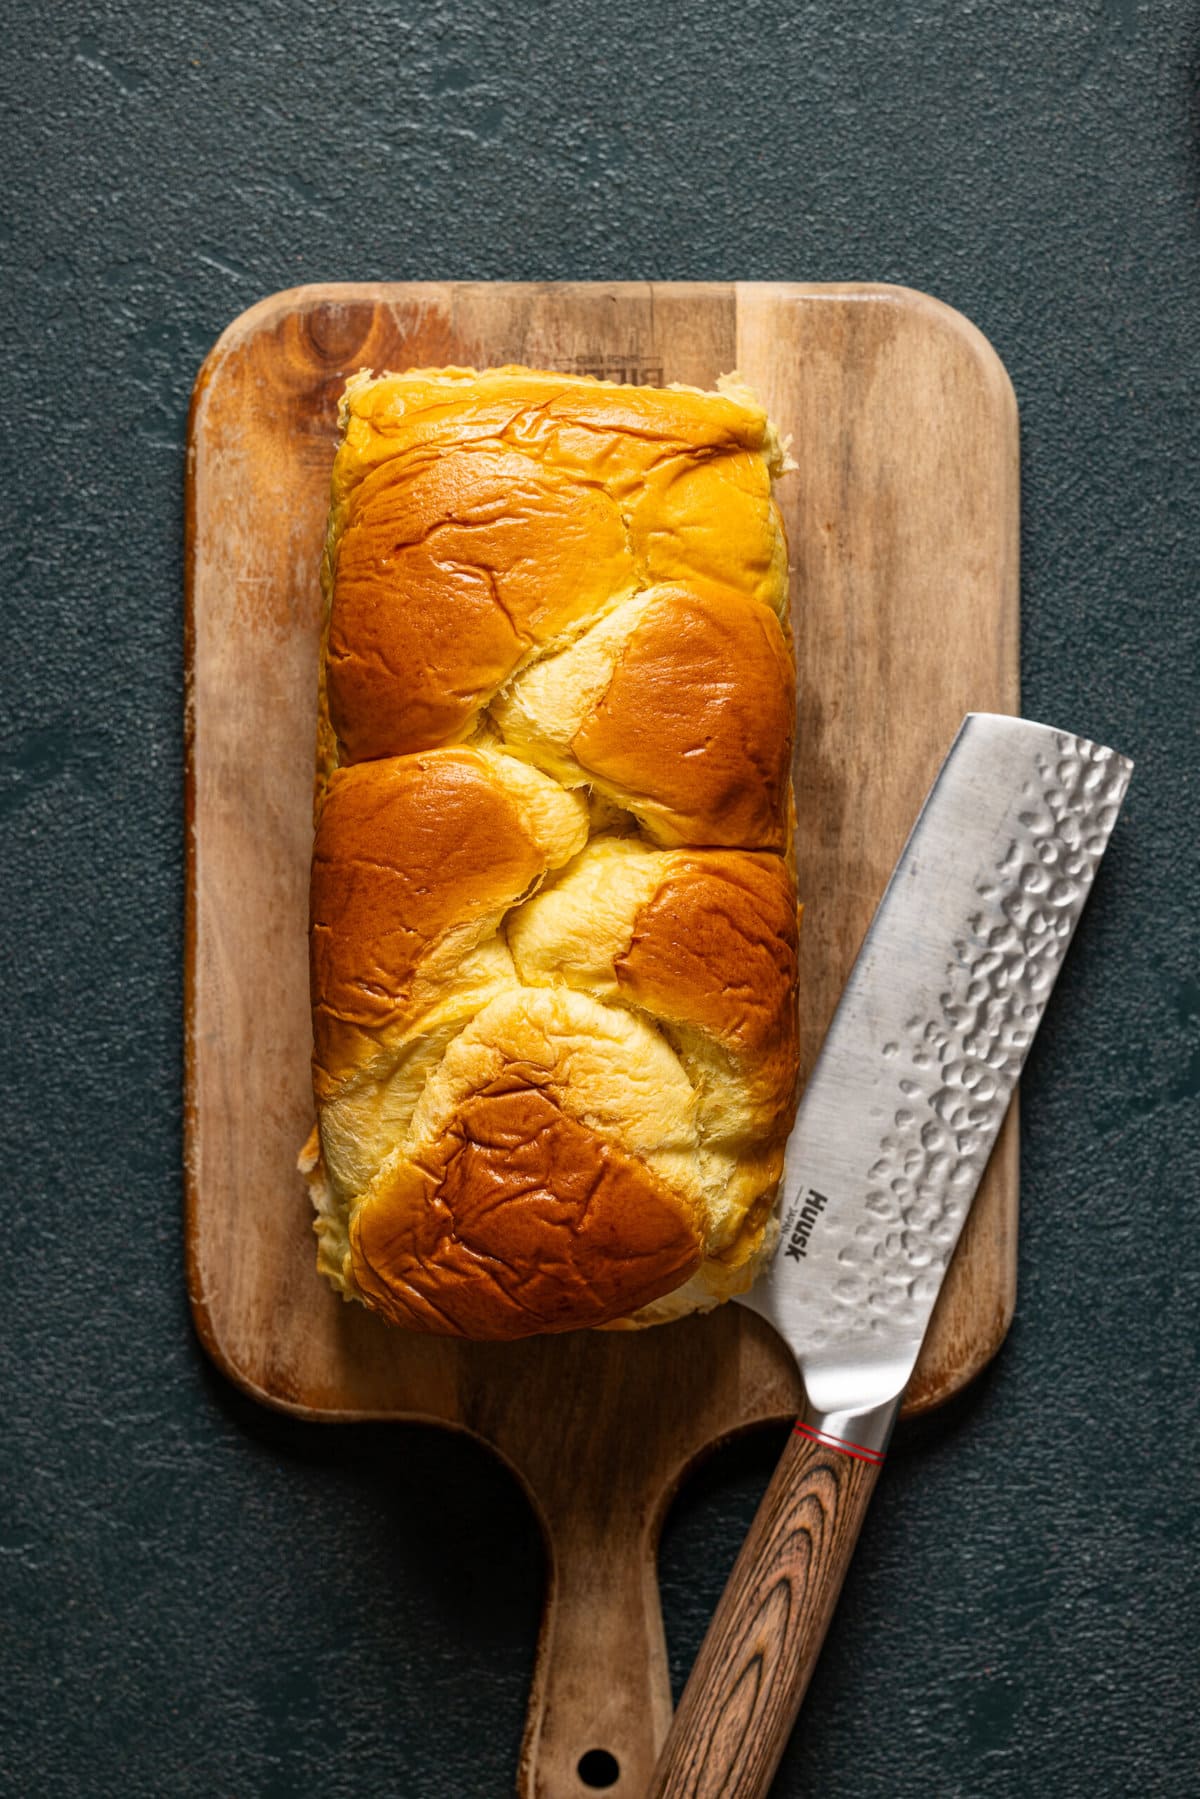 Loaf of bread on a cutting board with a knife.